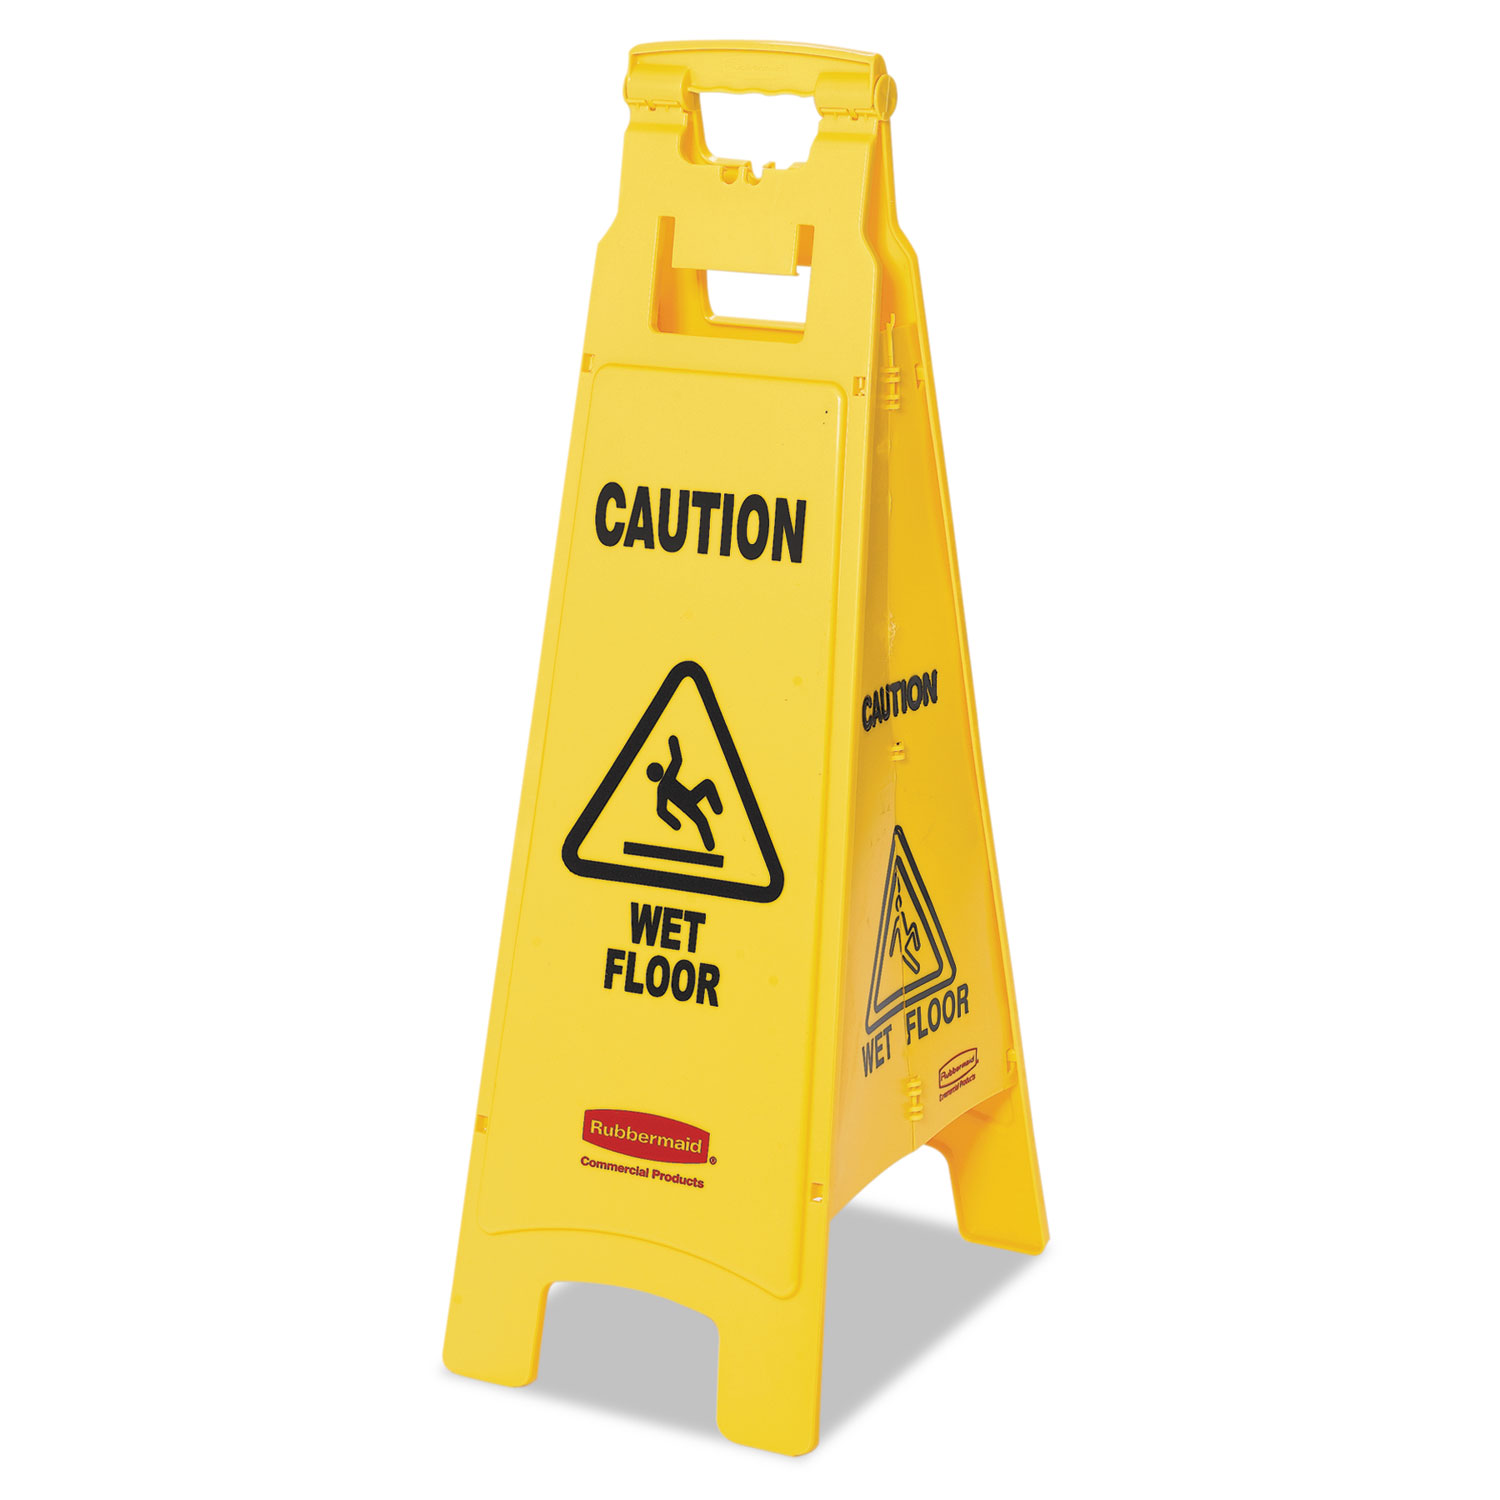  Rubbermaid Commercial FG611477YEL Caution Wet Floor Floor Sign, 4-Sided, Plastic, 12 x 16 x 38, Yellow (RCP611477YEL) 